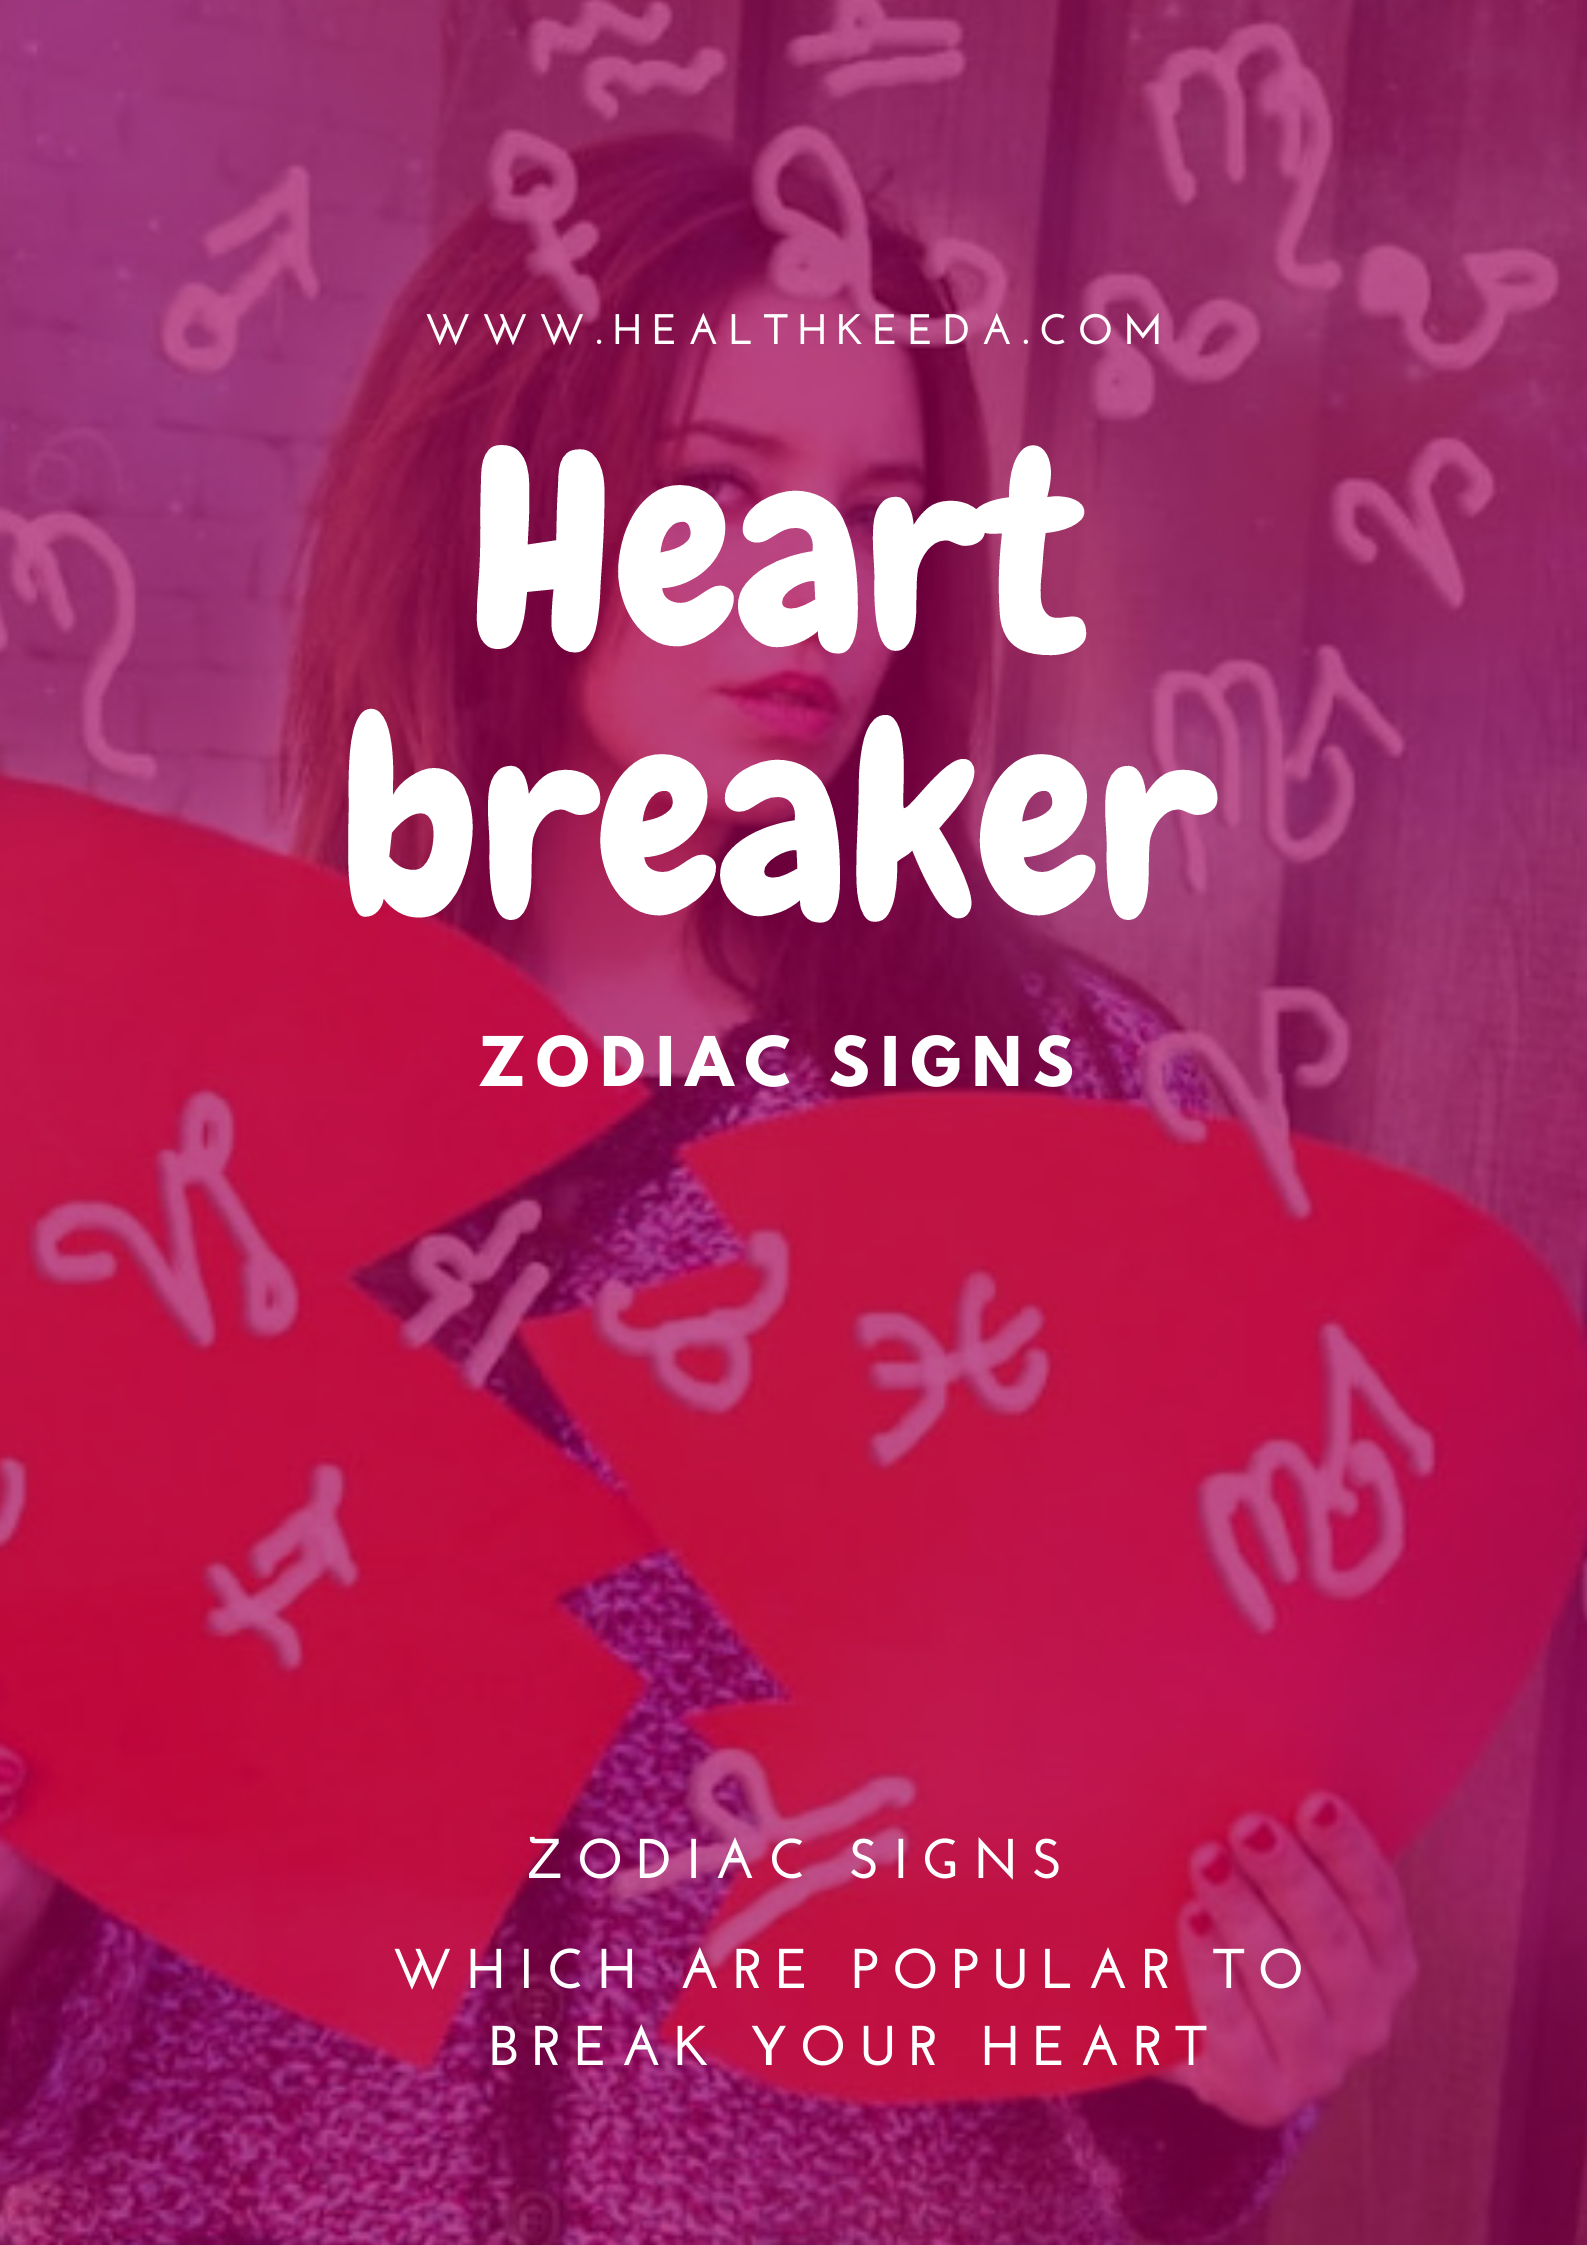 5 Zodiac Signs Most Likely To Break Your Heart